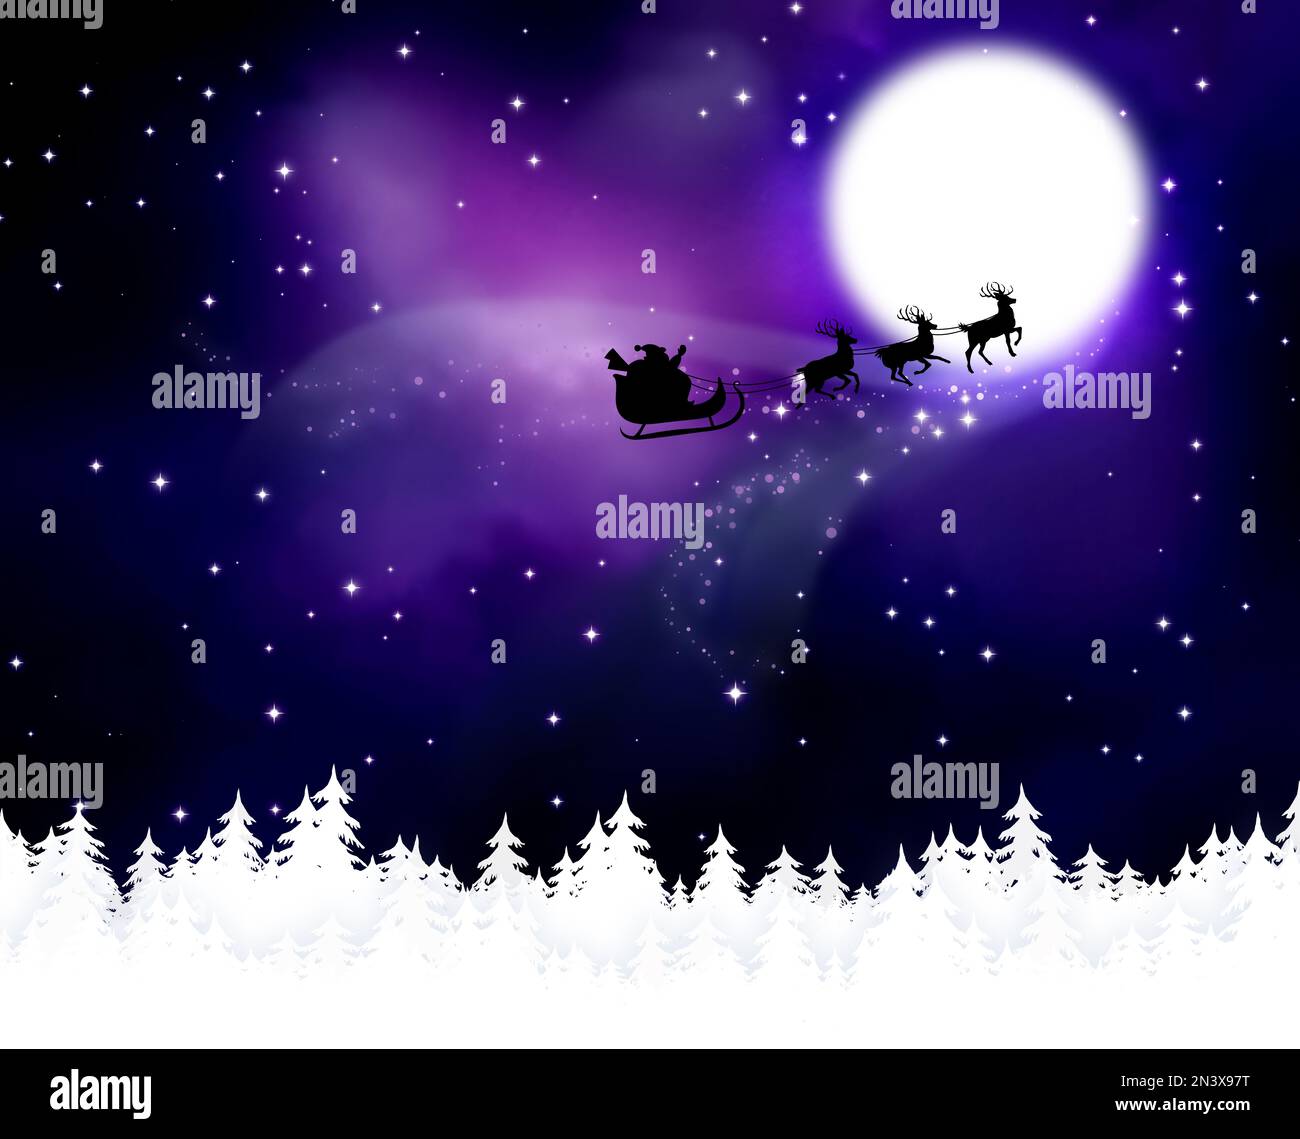 Magic Christmas eve. Santa with reindeers flying in sky on full moon night Stock Photo